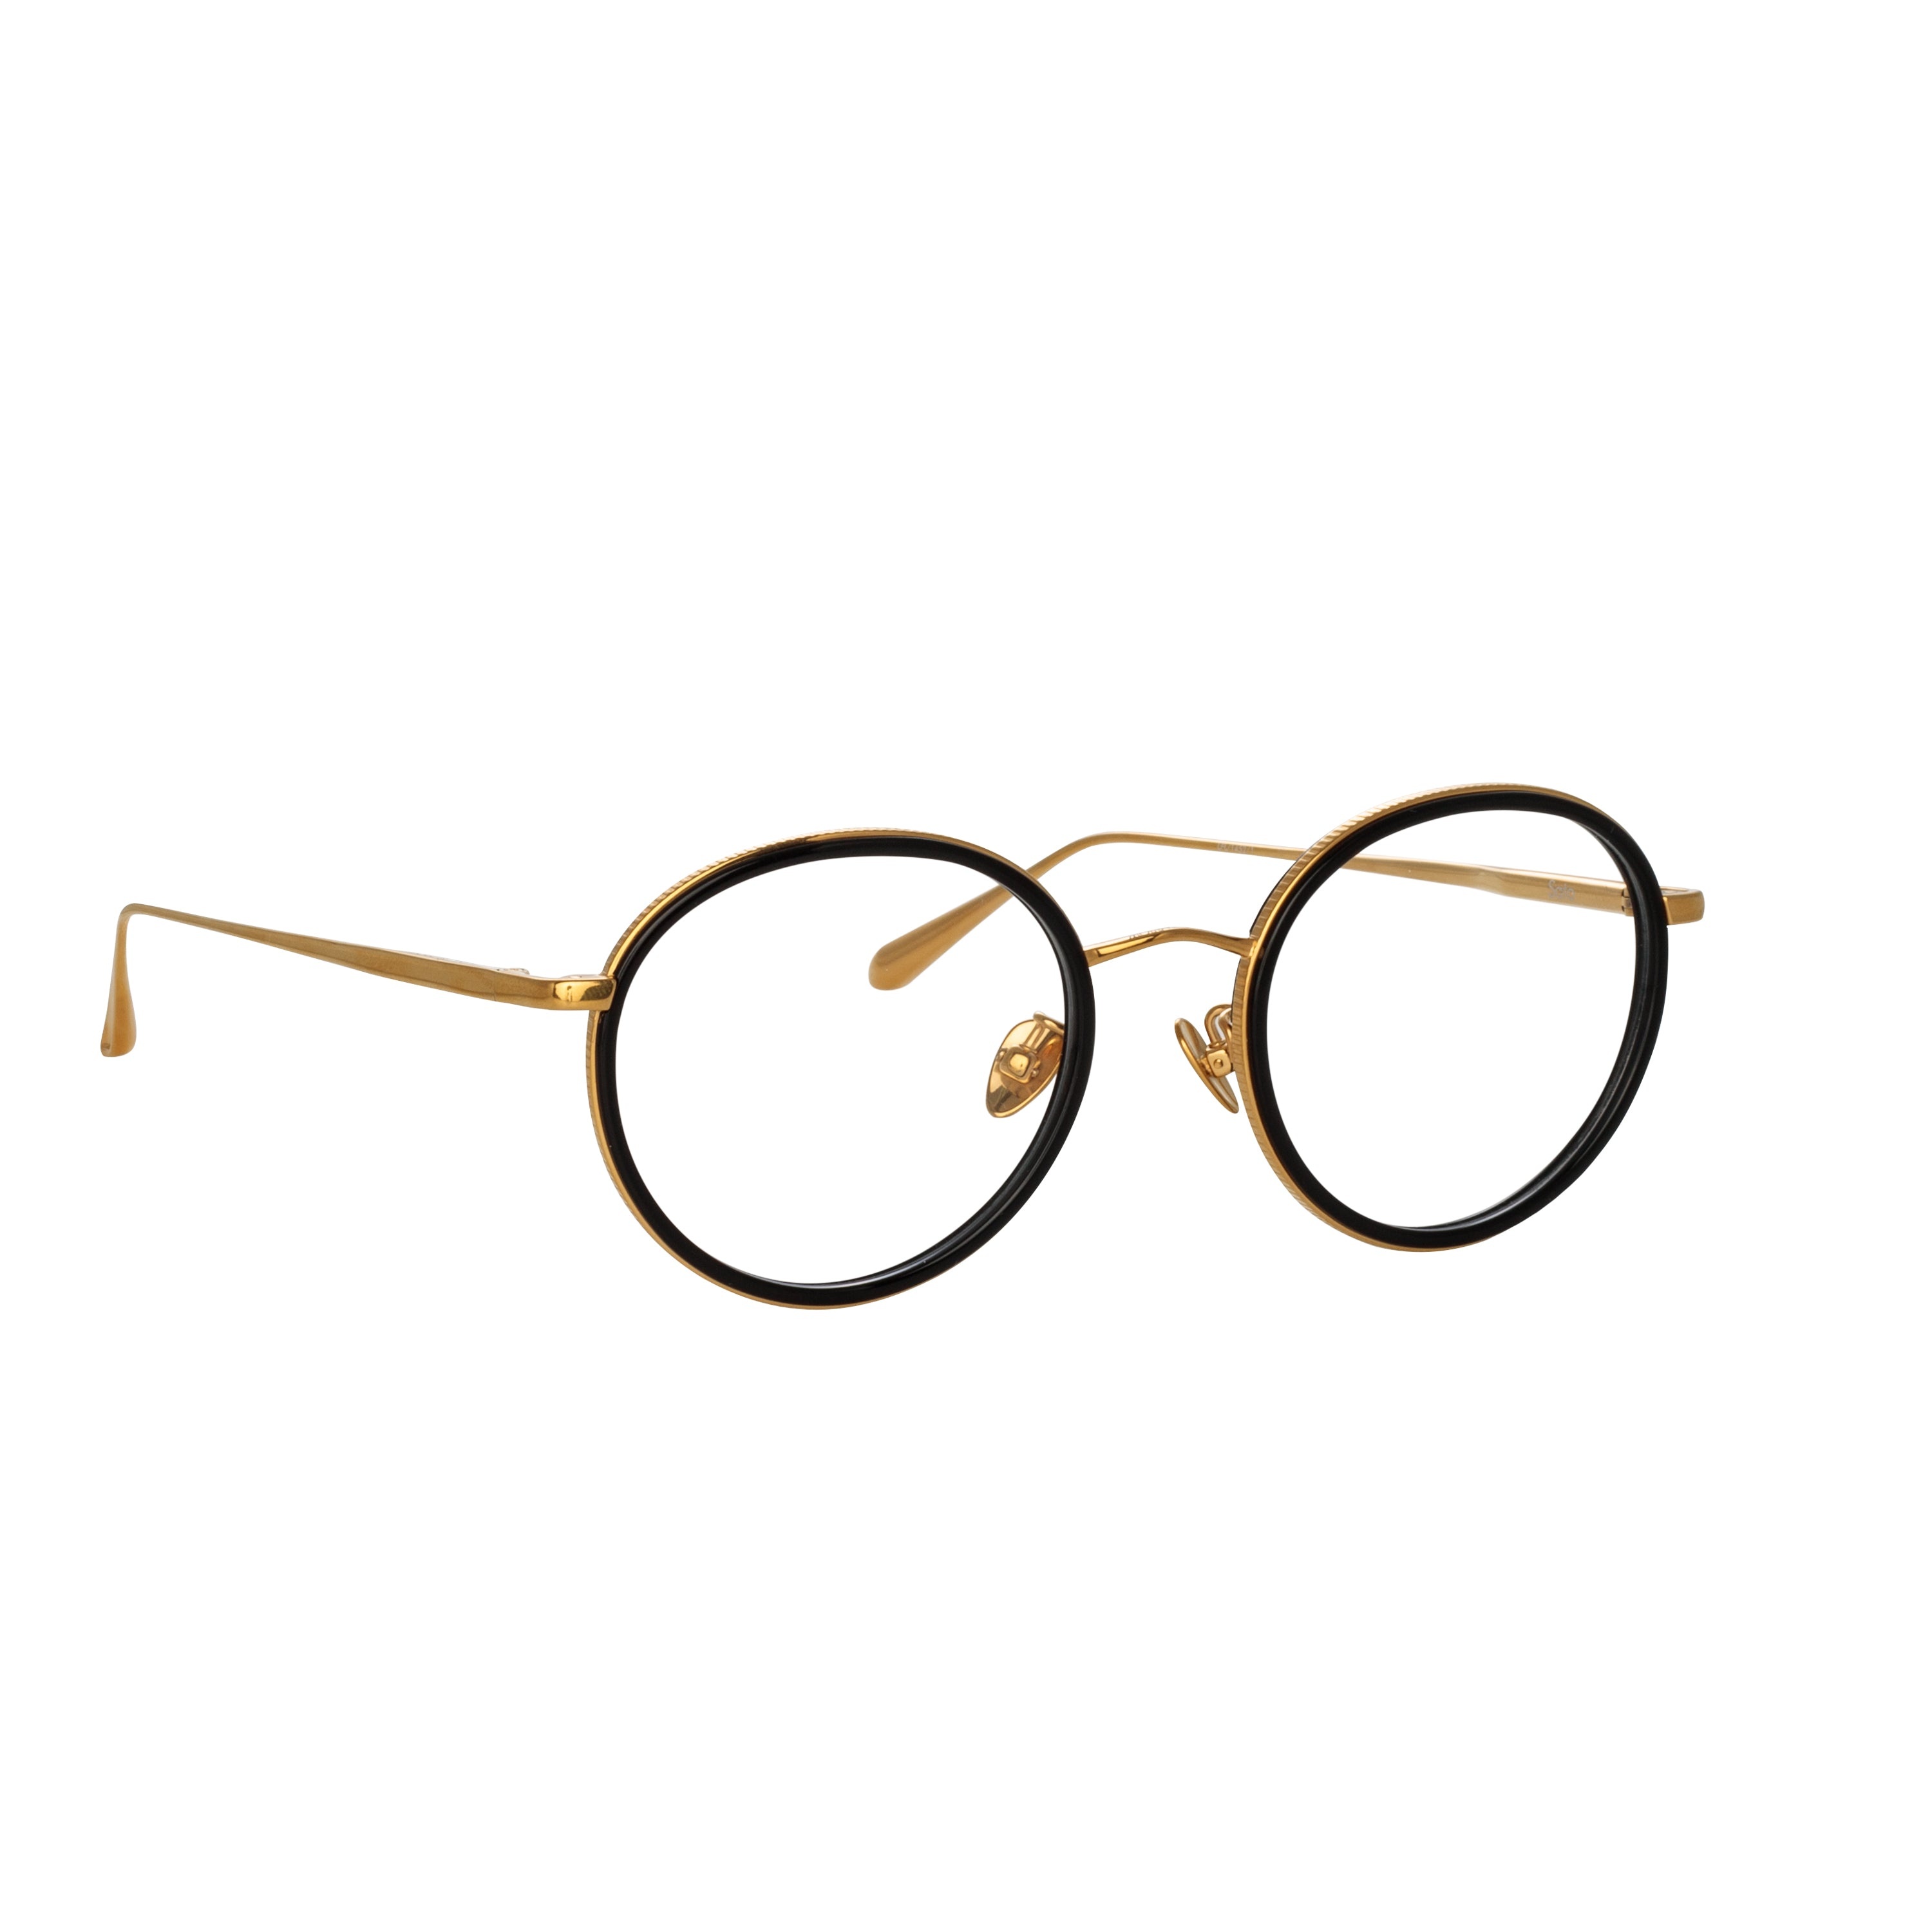 SATO OVAL OPTICAL FRAME IN YELLOW GOLD - 2